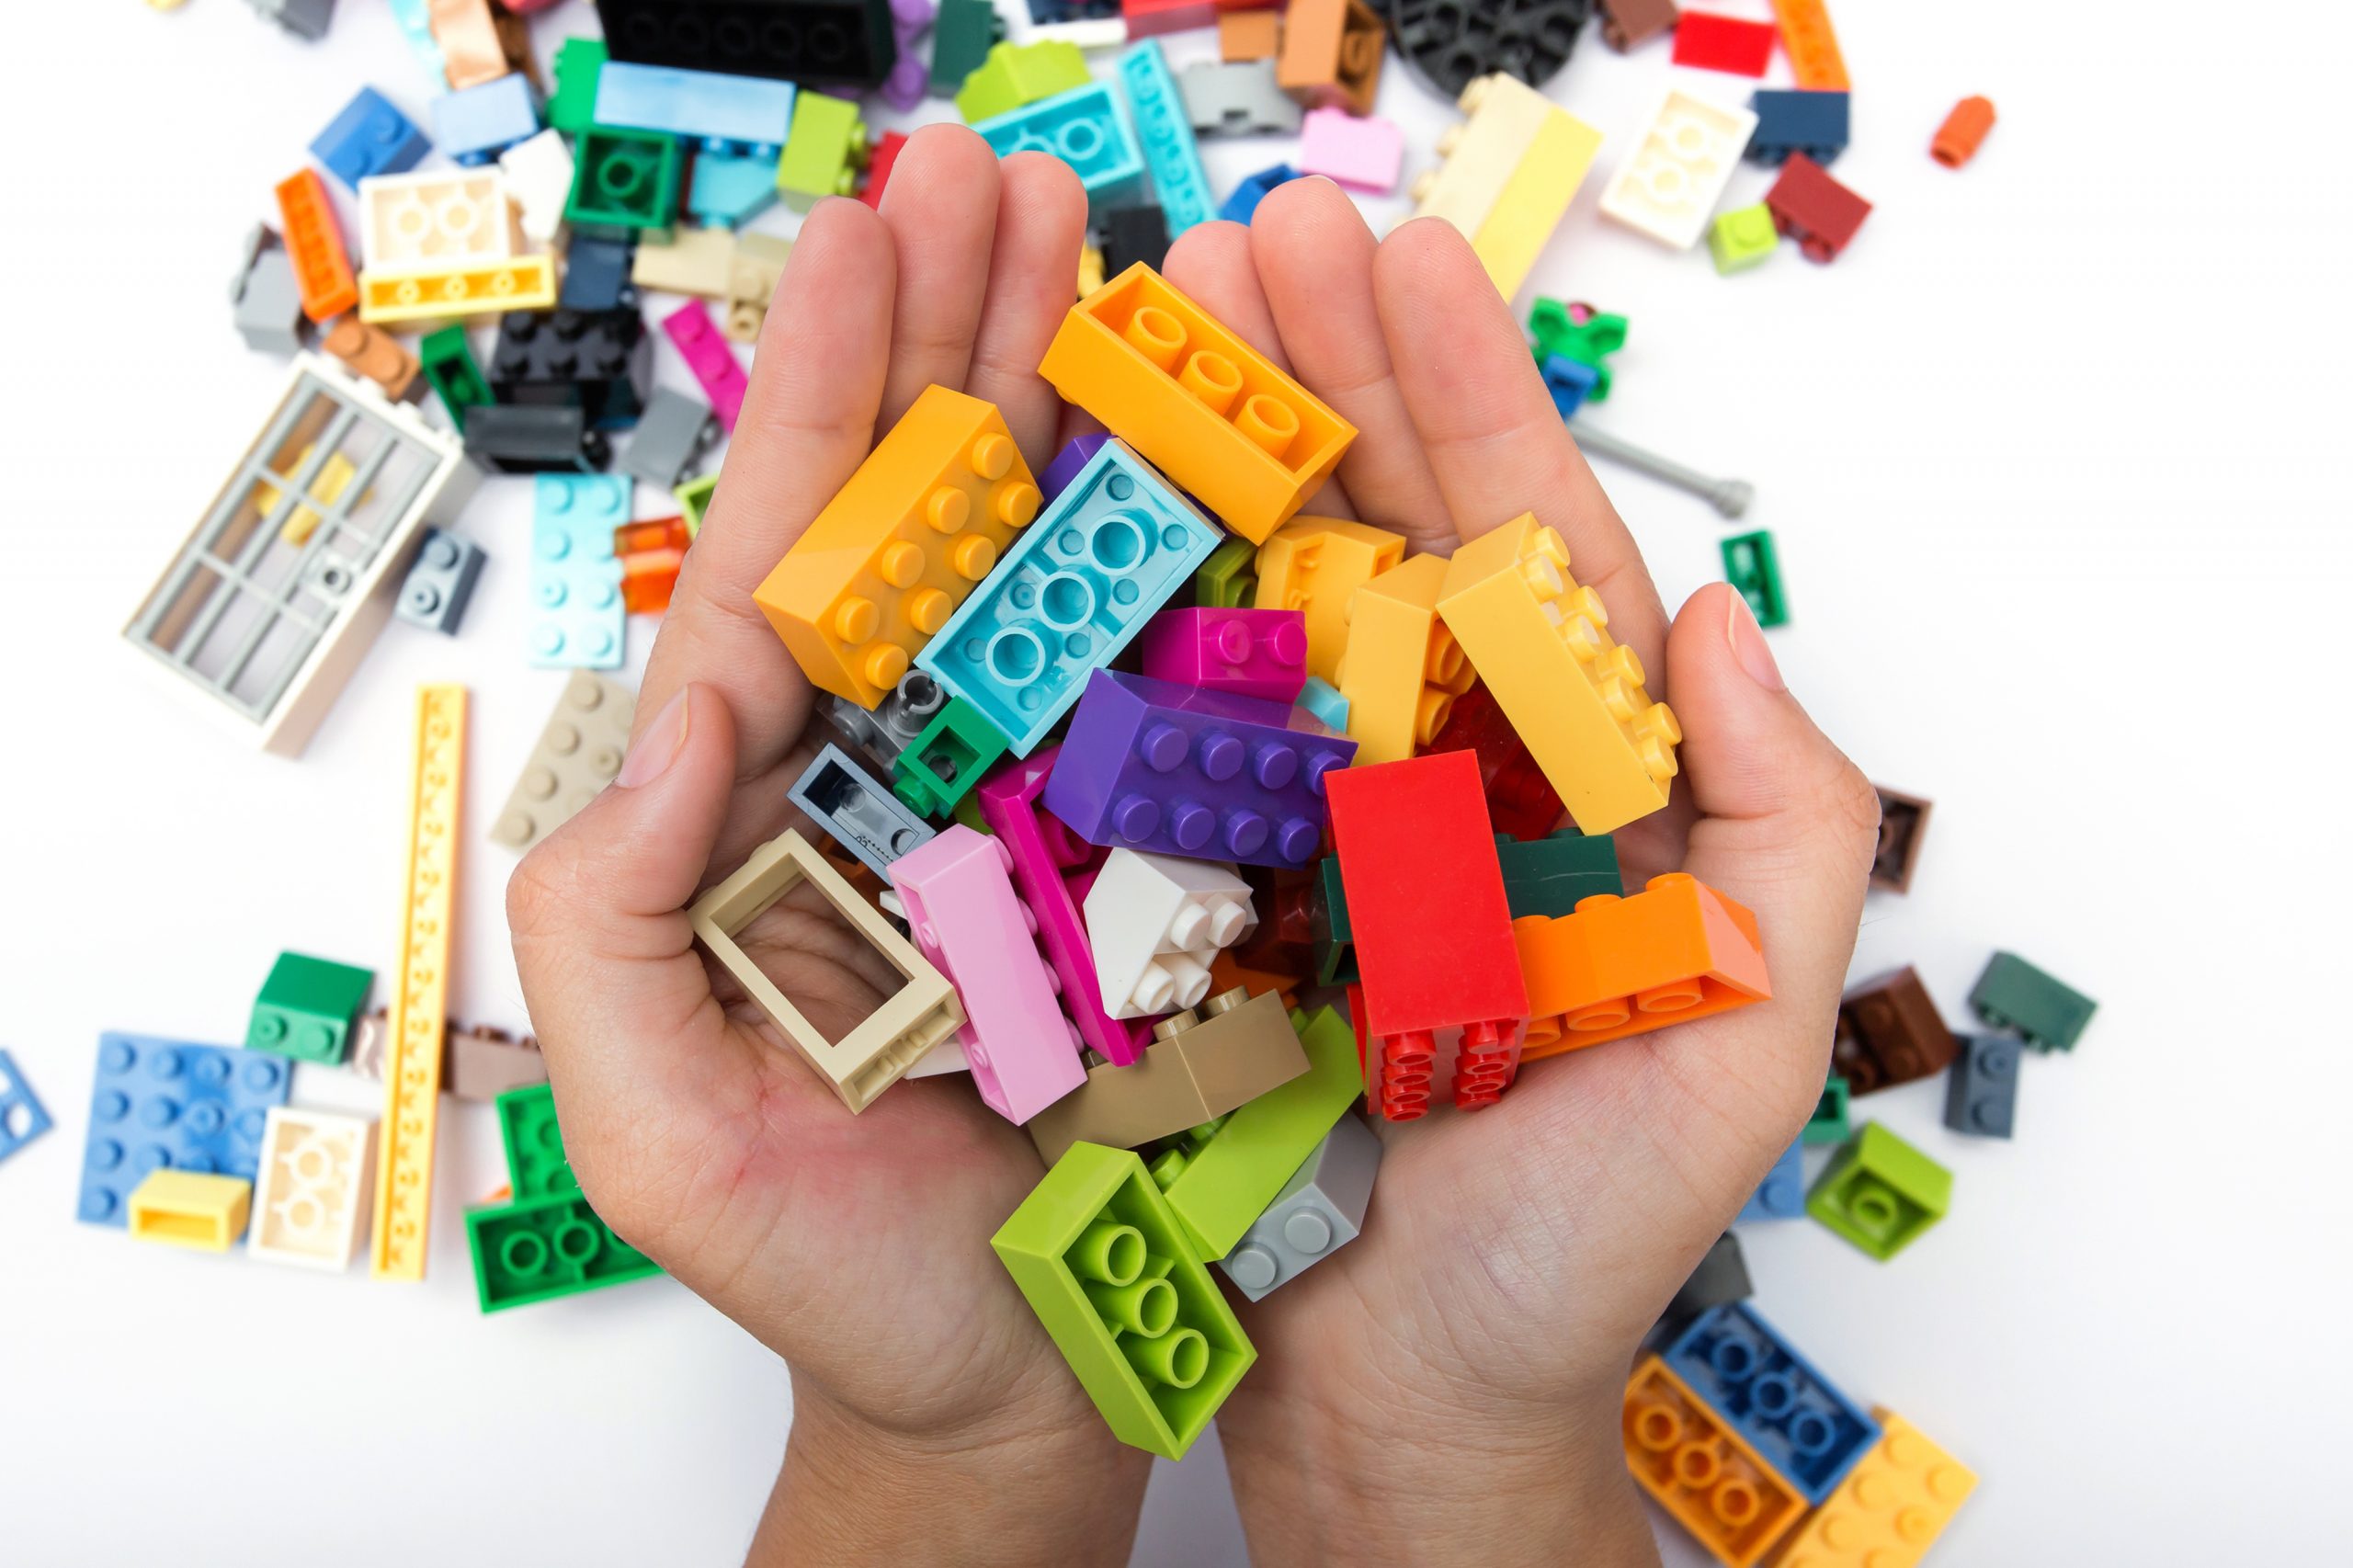 Colouorful Lego bricks of different shapes and sizes